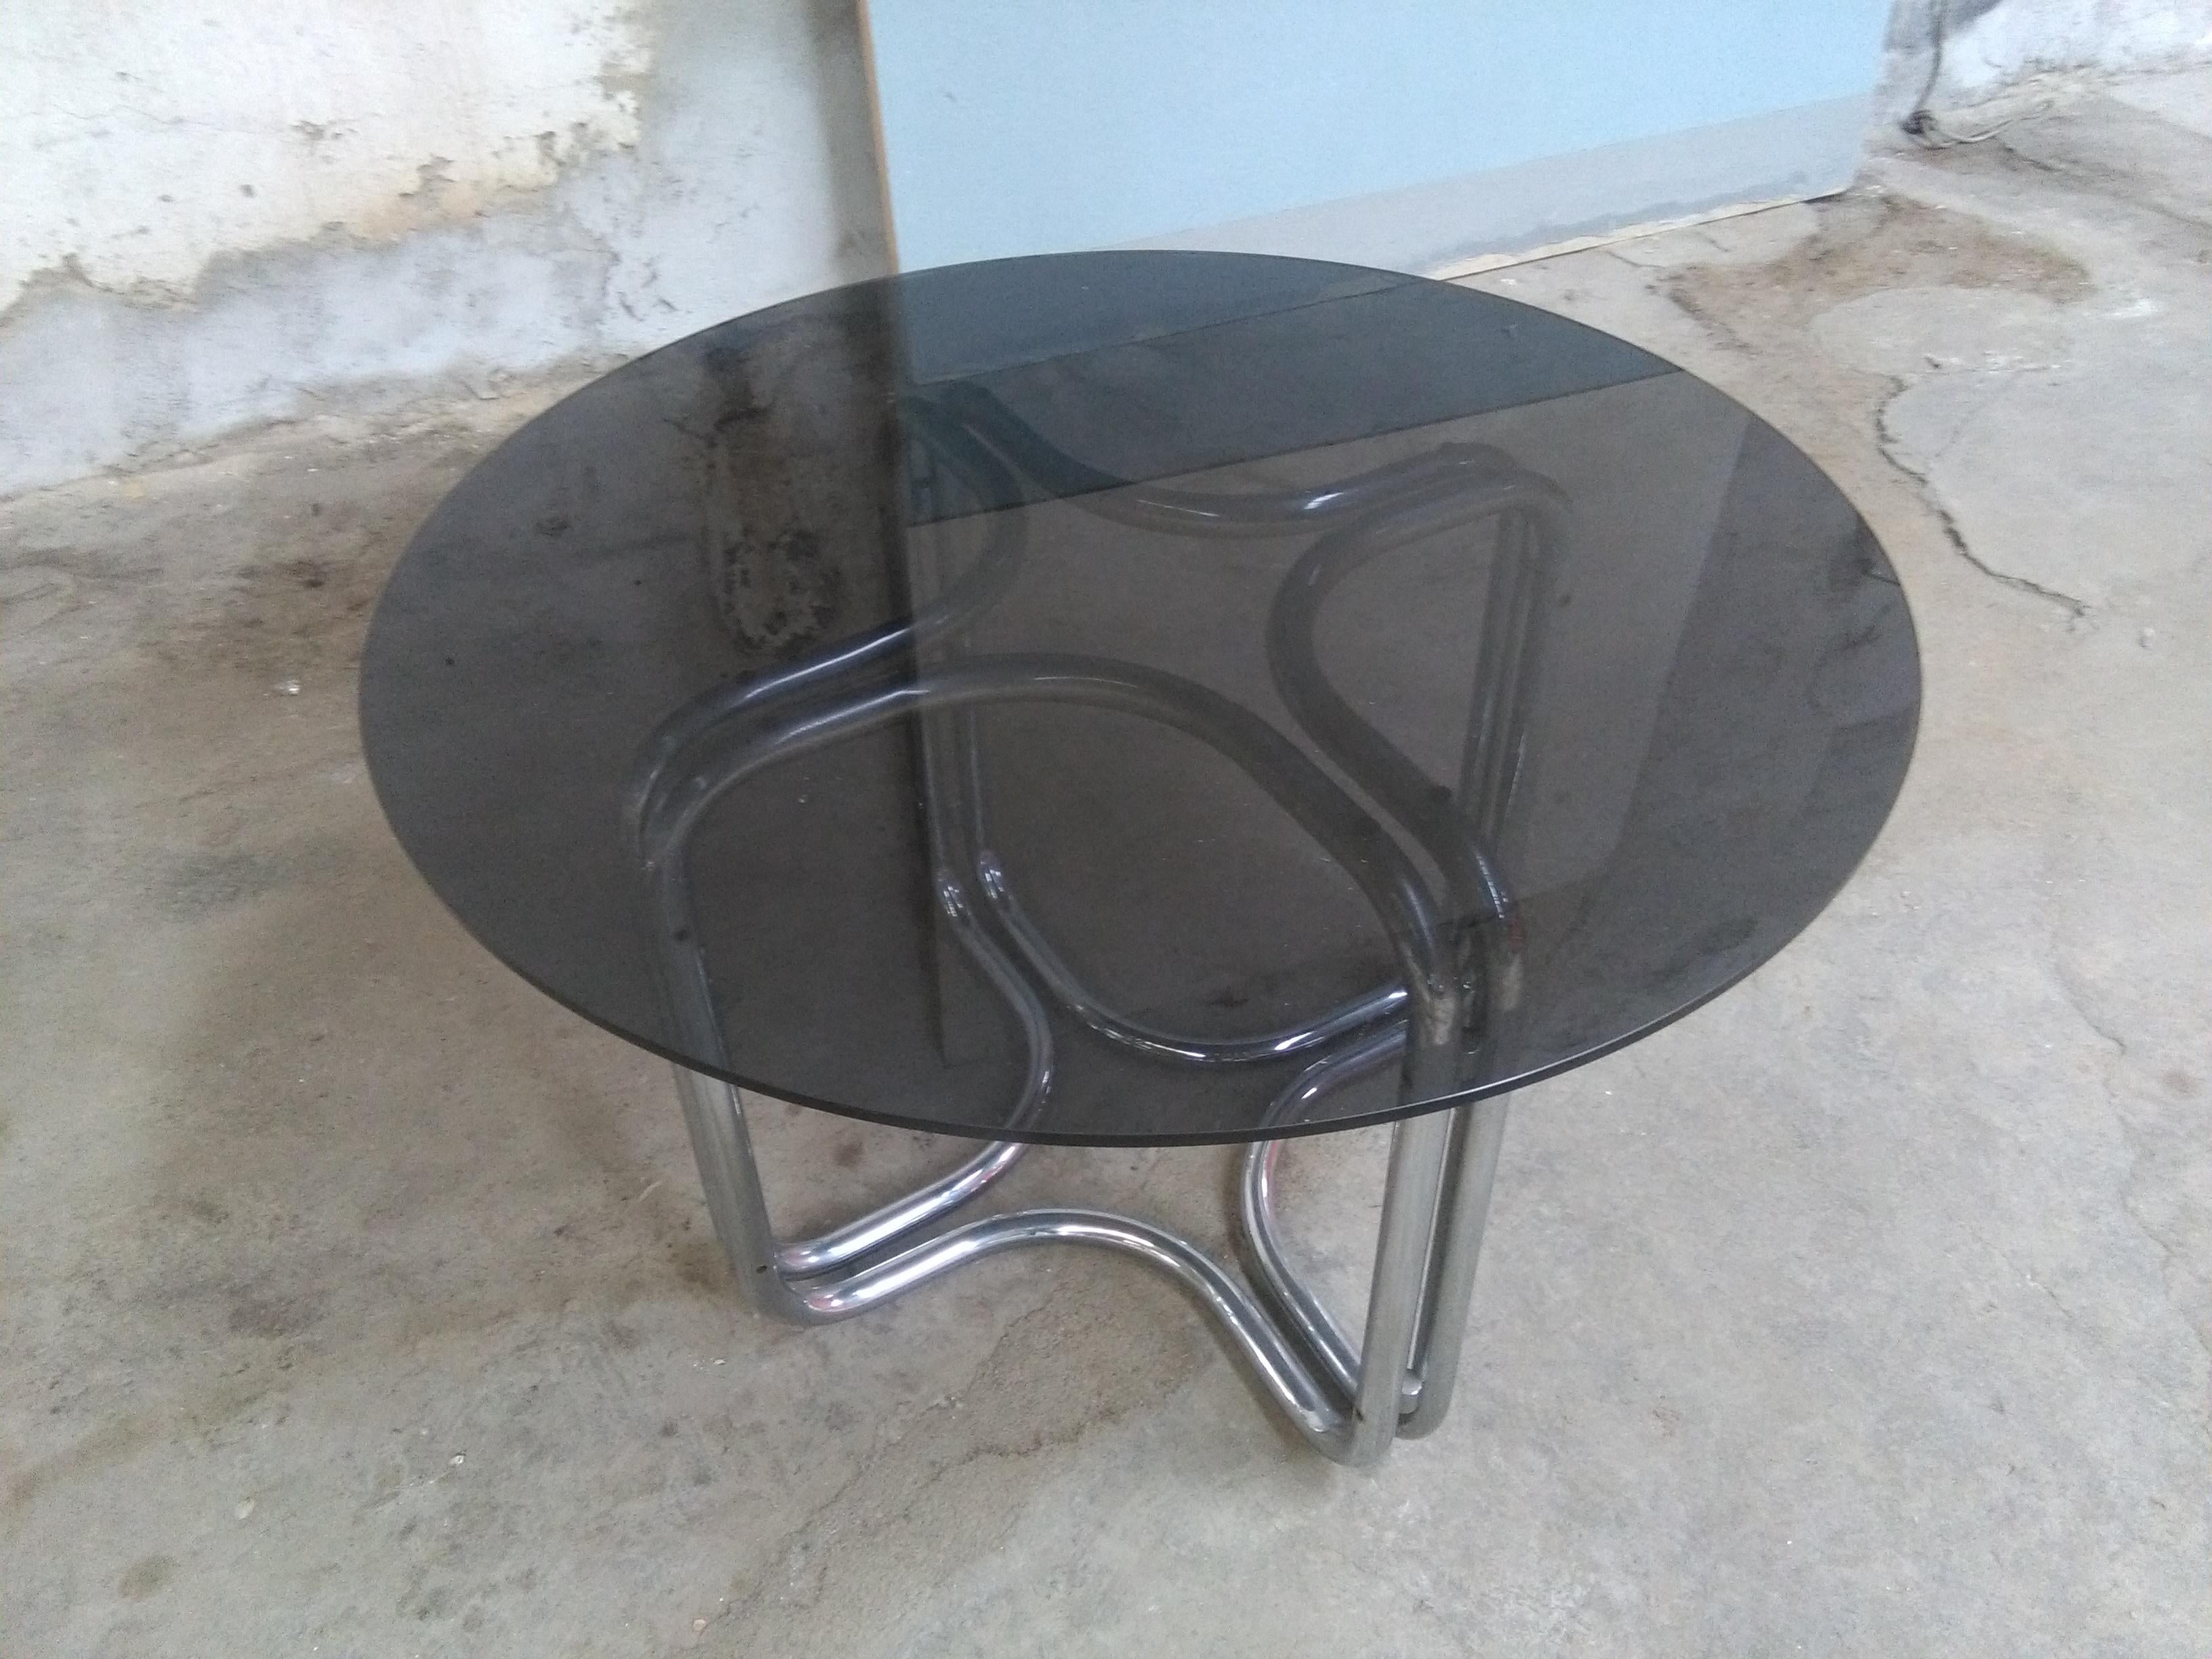 1970s chrome and glass dining table